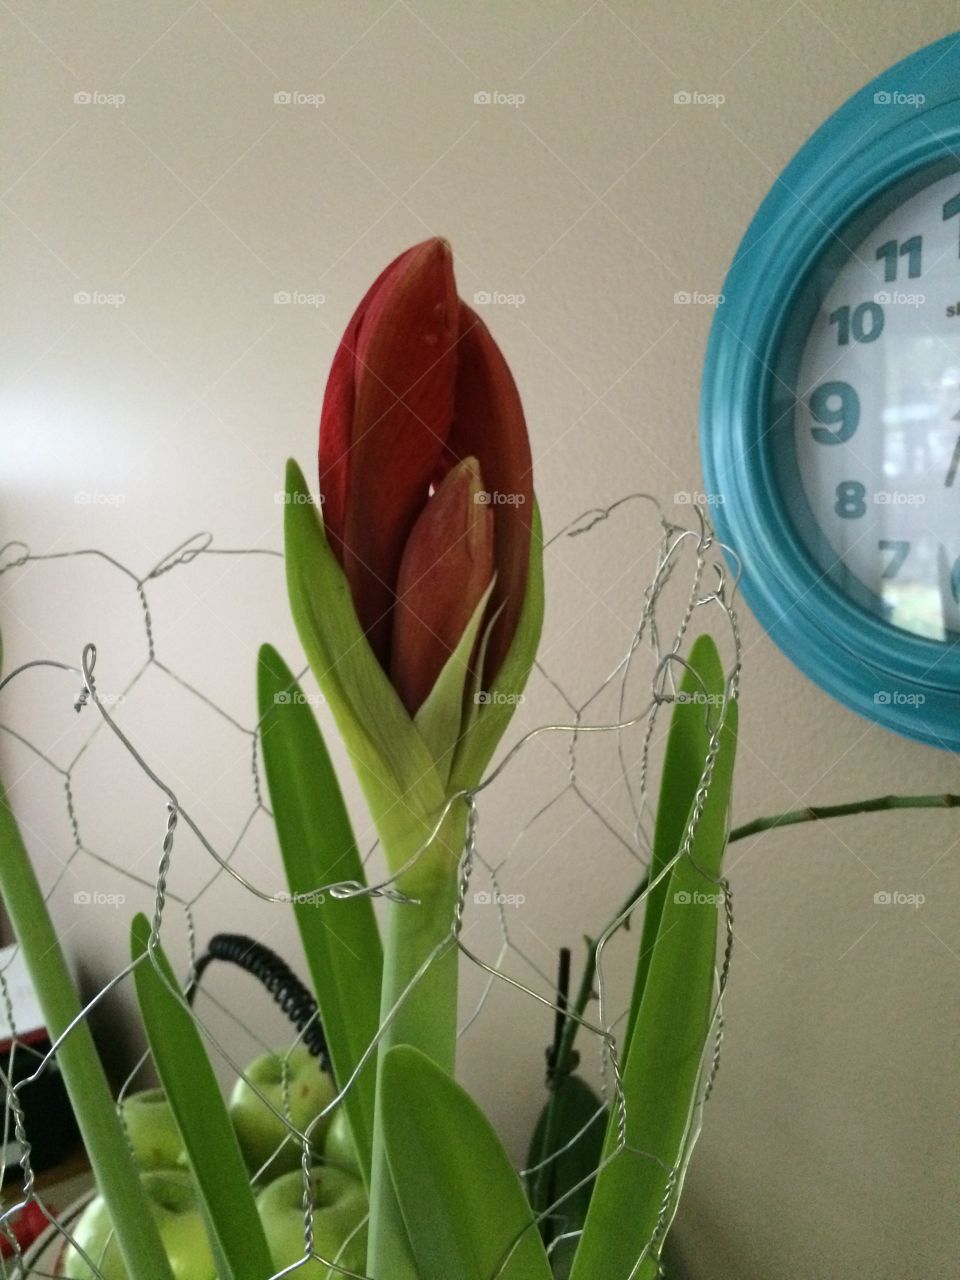 Amaryllis . It's about to bloom